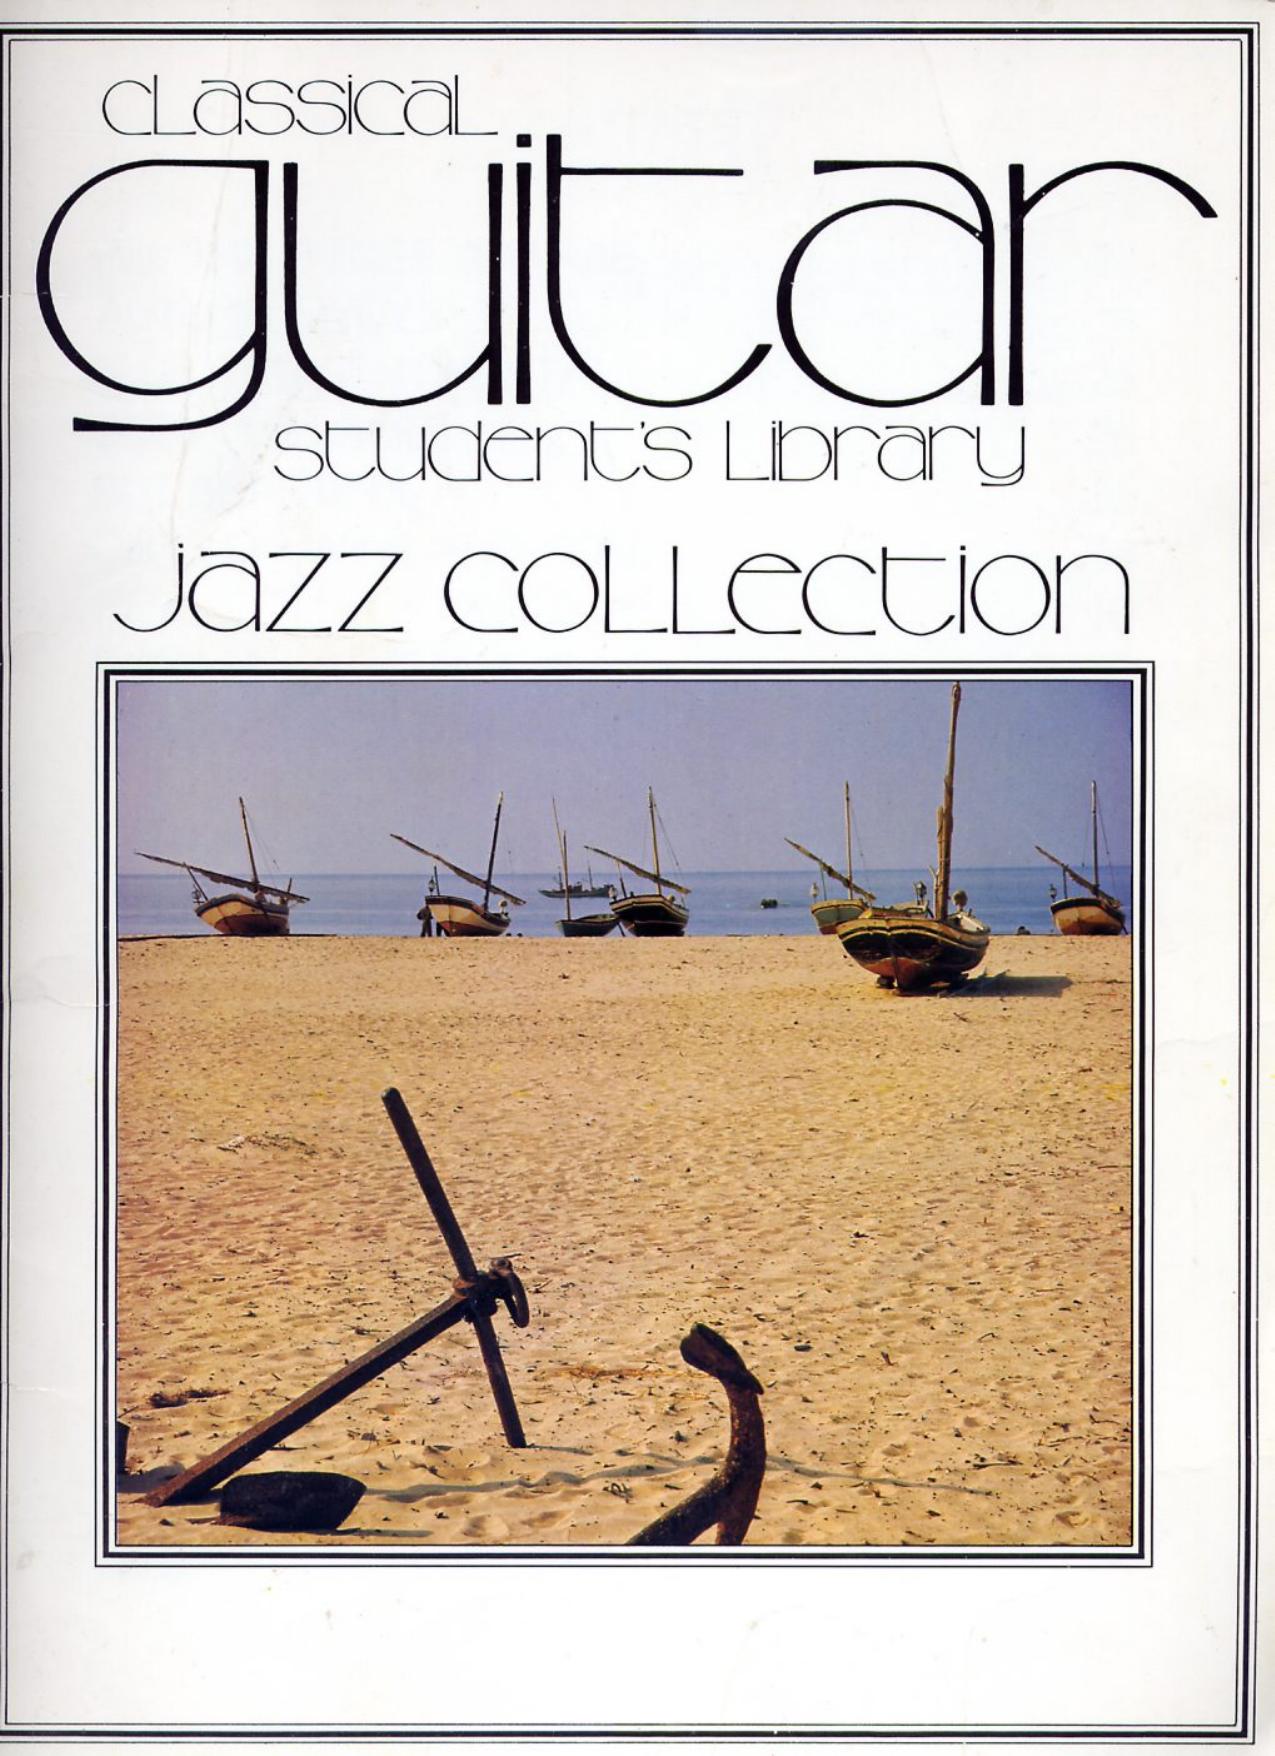 Jazz Collection (Classical Guitar Students Library)